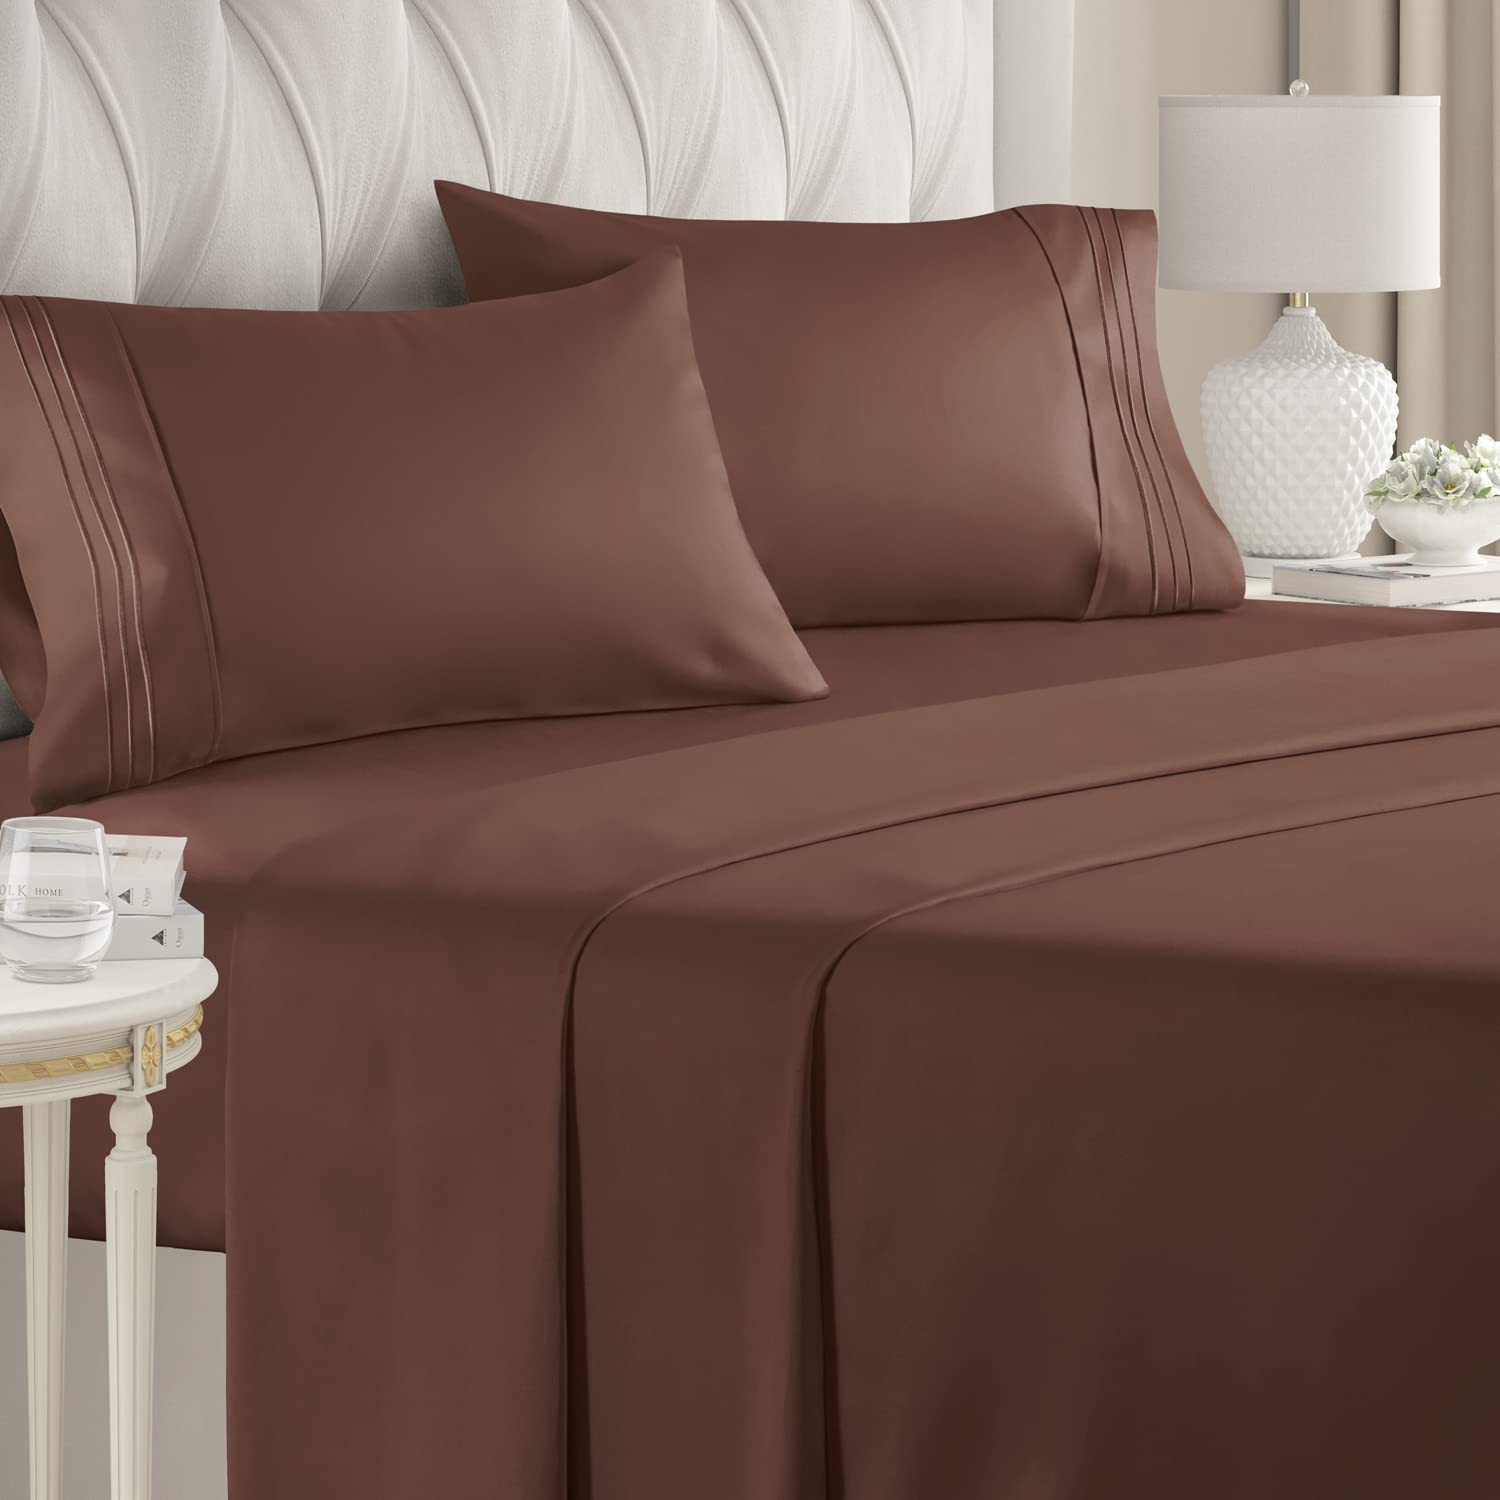 Buy Calking Size Flat Sheet Chocolate Egyptian Cotton 1000 Thread Count at- Egyptianhomelinens.com